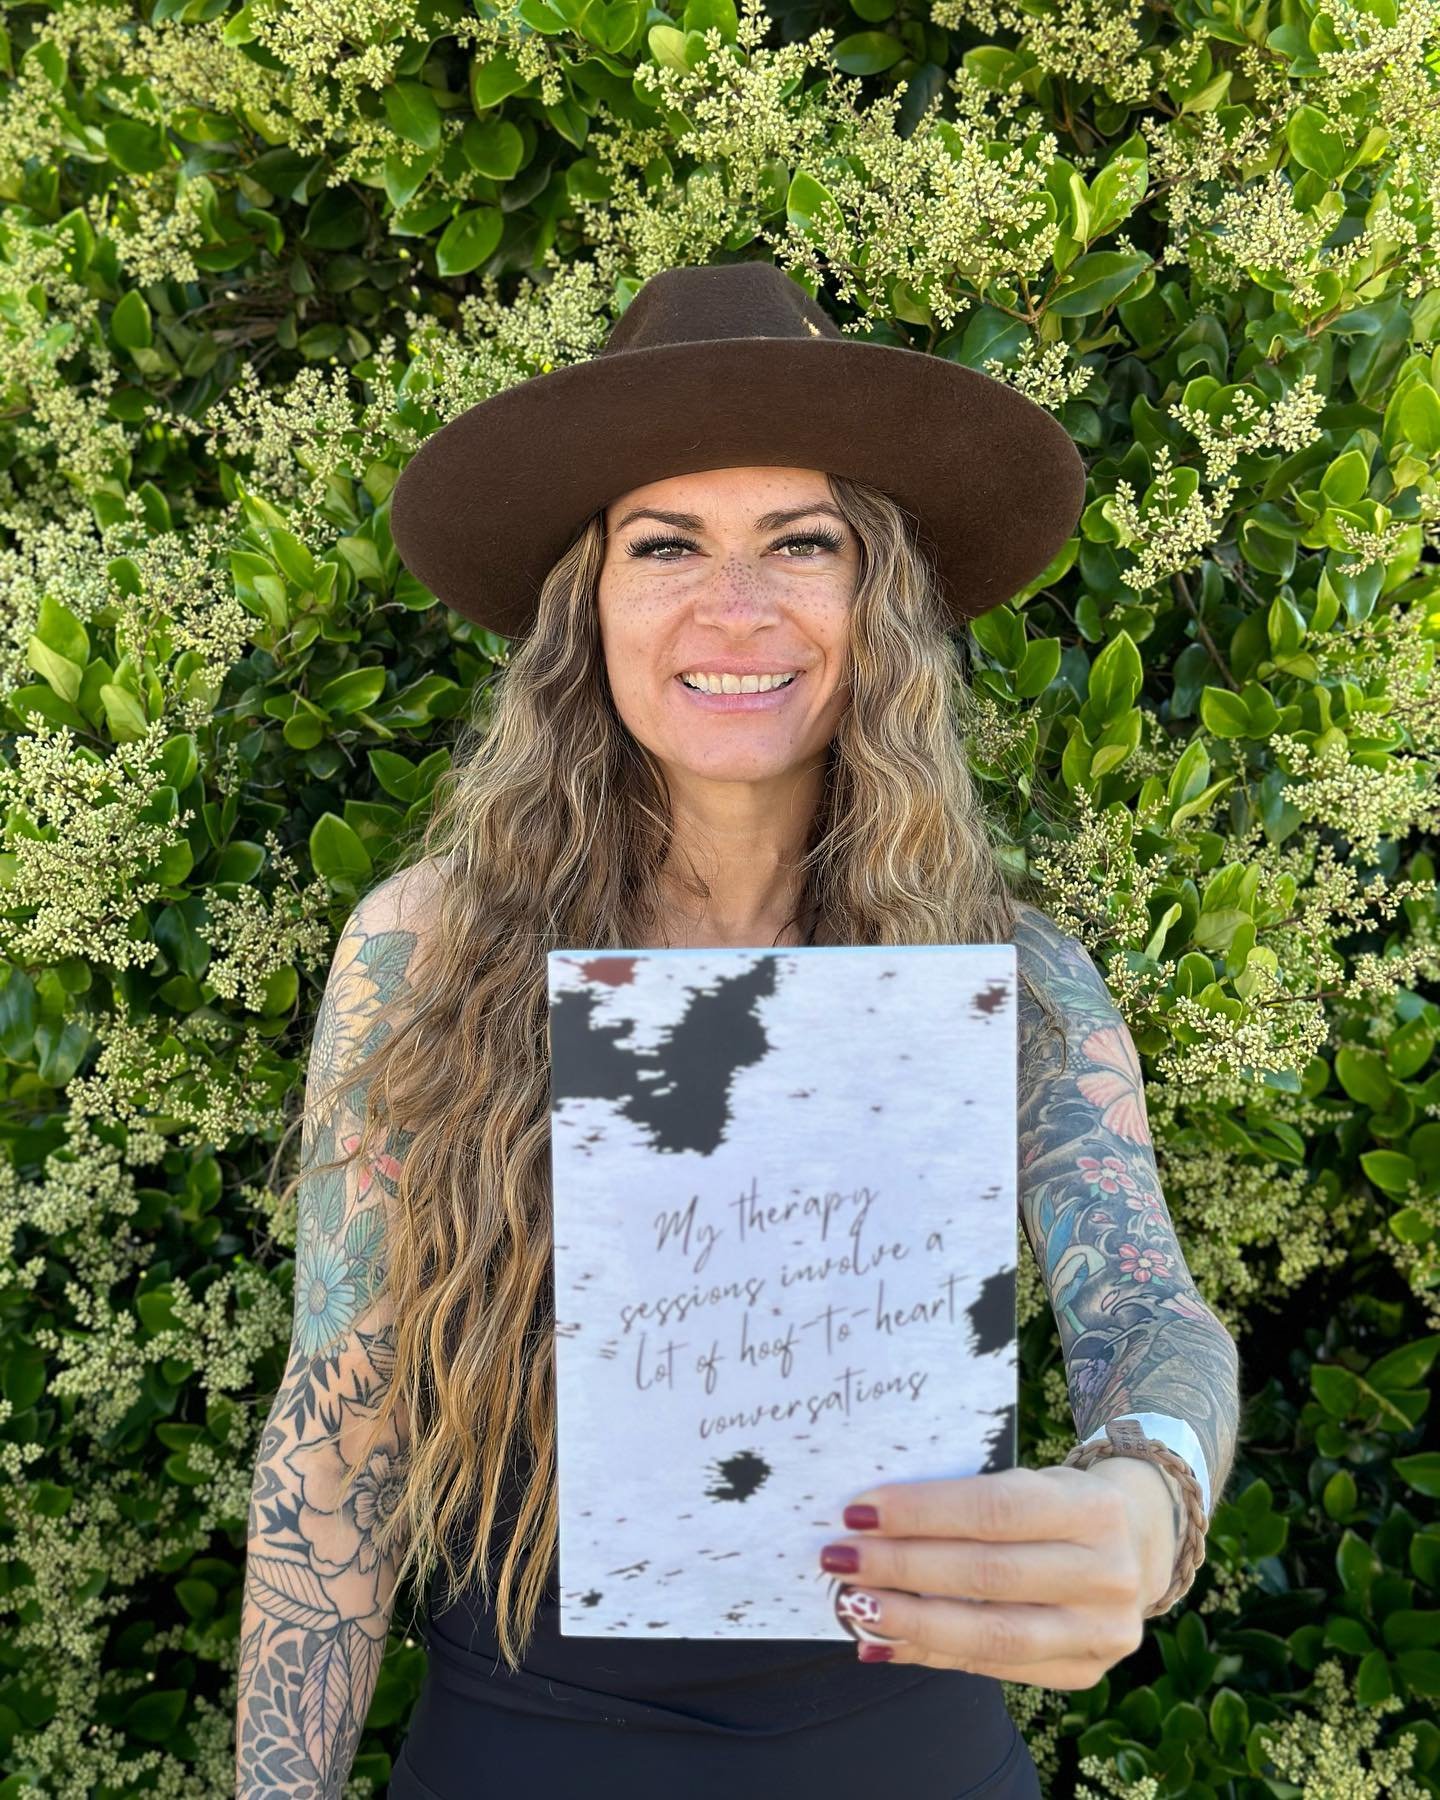 🐴✨ Calling all horse lovers and supporters of equine assisted therapy! 🌿📔 Introducing our brand new journal designed to accompany you on your healing journey with horses. Document your experiences, reflections, and progress as you connect with the